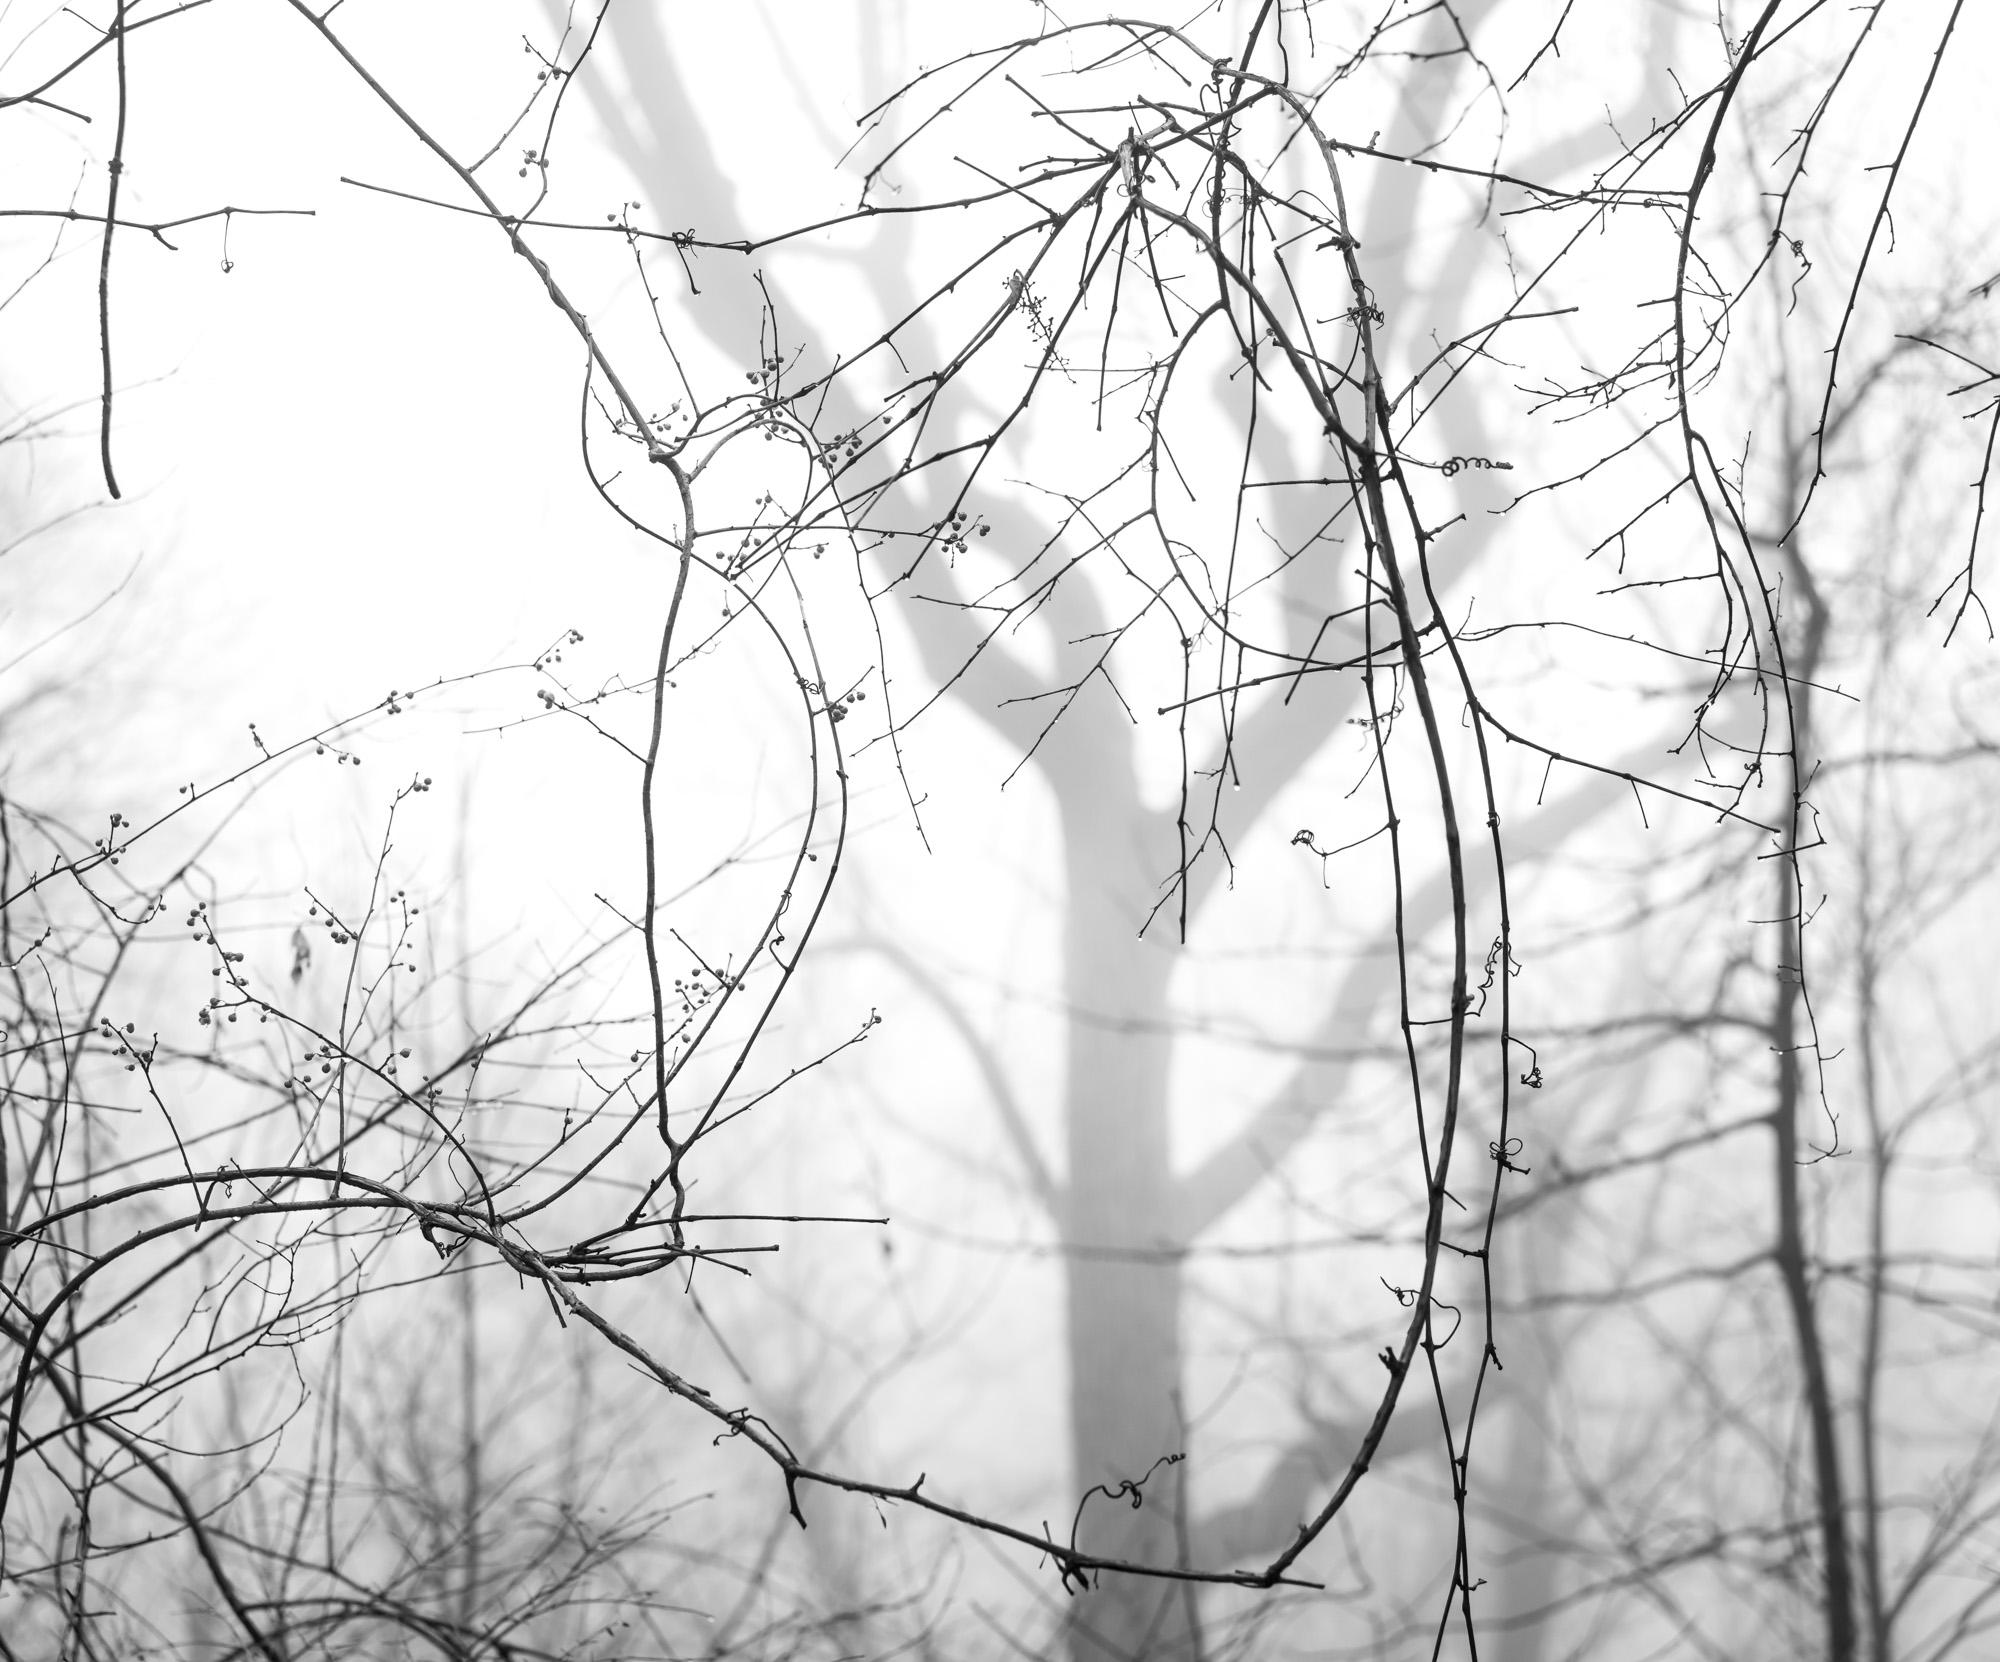 Limited Edition Black and White Photograph, " Twigs and Fog ", 2020. Photographing on rainy foggy days can be miserable but it has it's rewards.

About:
Lewis’ artistic practice often explores science, engineering, technology, and innovation. His